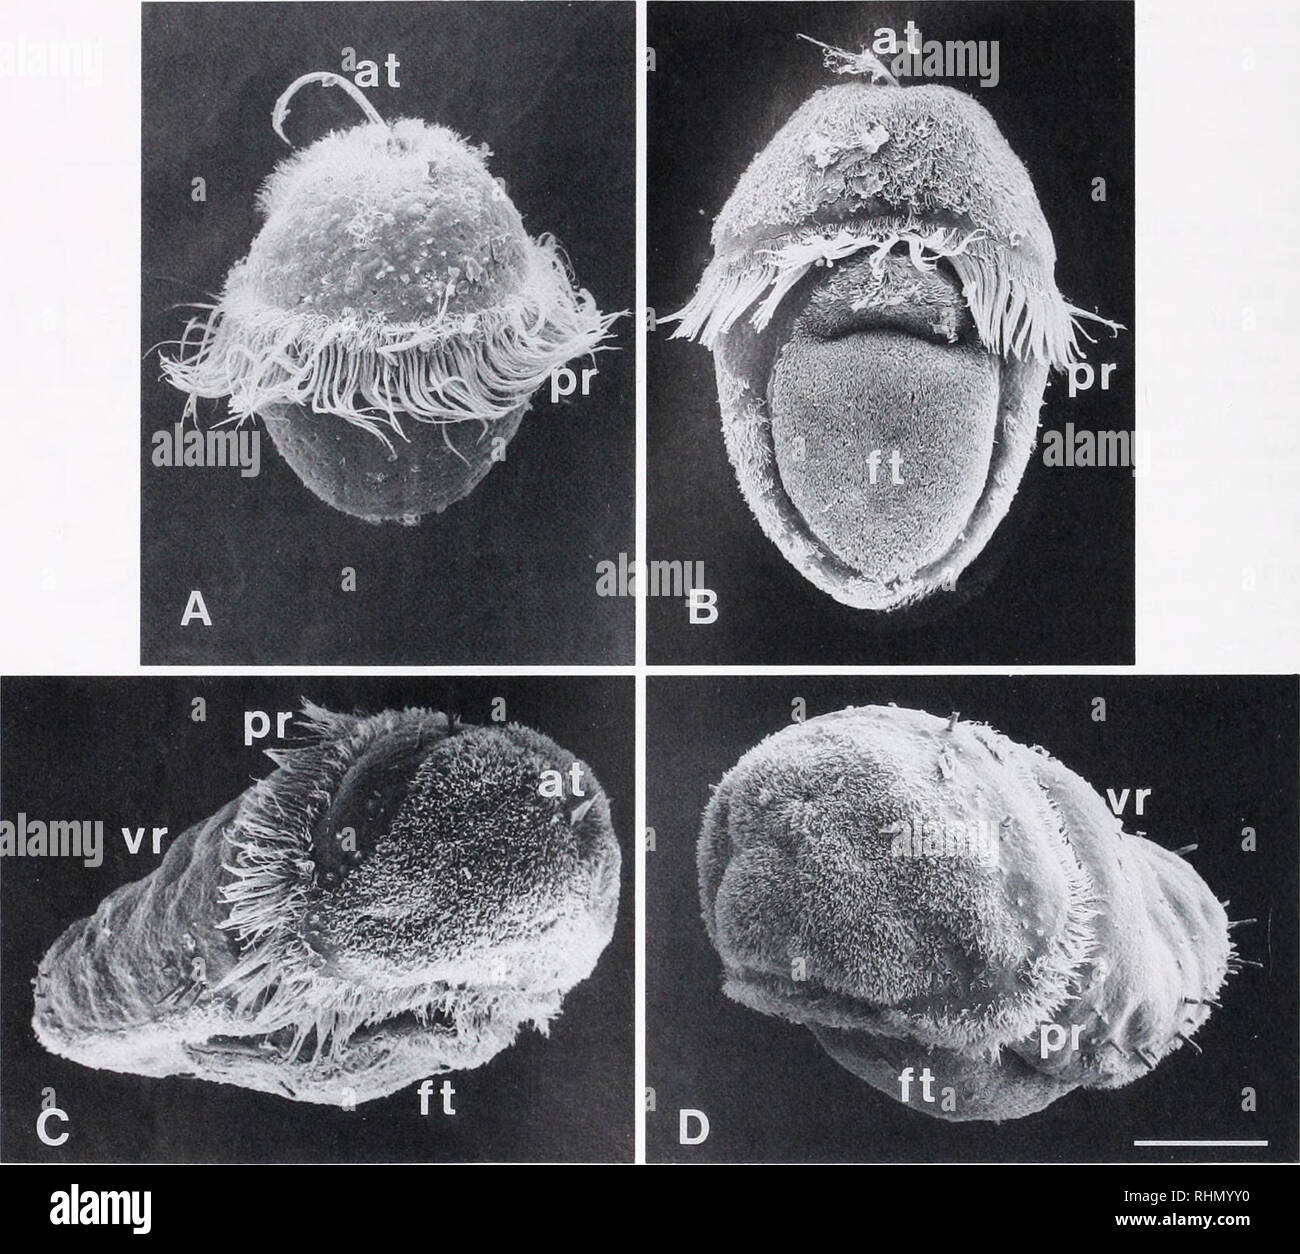 . The Biological bulletin. Biology; Zoology; Biology; Marine Biology. 294 D. J. EERNISSE. Figure 7. Larvae near stage of hatching as imaged with SEM in (a) Lepidochitona hartwegii (approx. 2 days old, fixed approximately 12 hours after synchronous hatching of a culture from one free-spawning female); (b) L cavema (approx. 7 days old); L thomasi (approx. 9 days old); and (d) L fernaldi (approx. 9 days old). Explanation of symbols: pr = prototroch; at = apical tuft; ft = foot; vr = valve rudiments. Scale bar: (a-d) = 50 ^m. in time of hatching was observed in any of the species. In several cultu Stock Photo